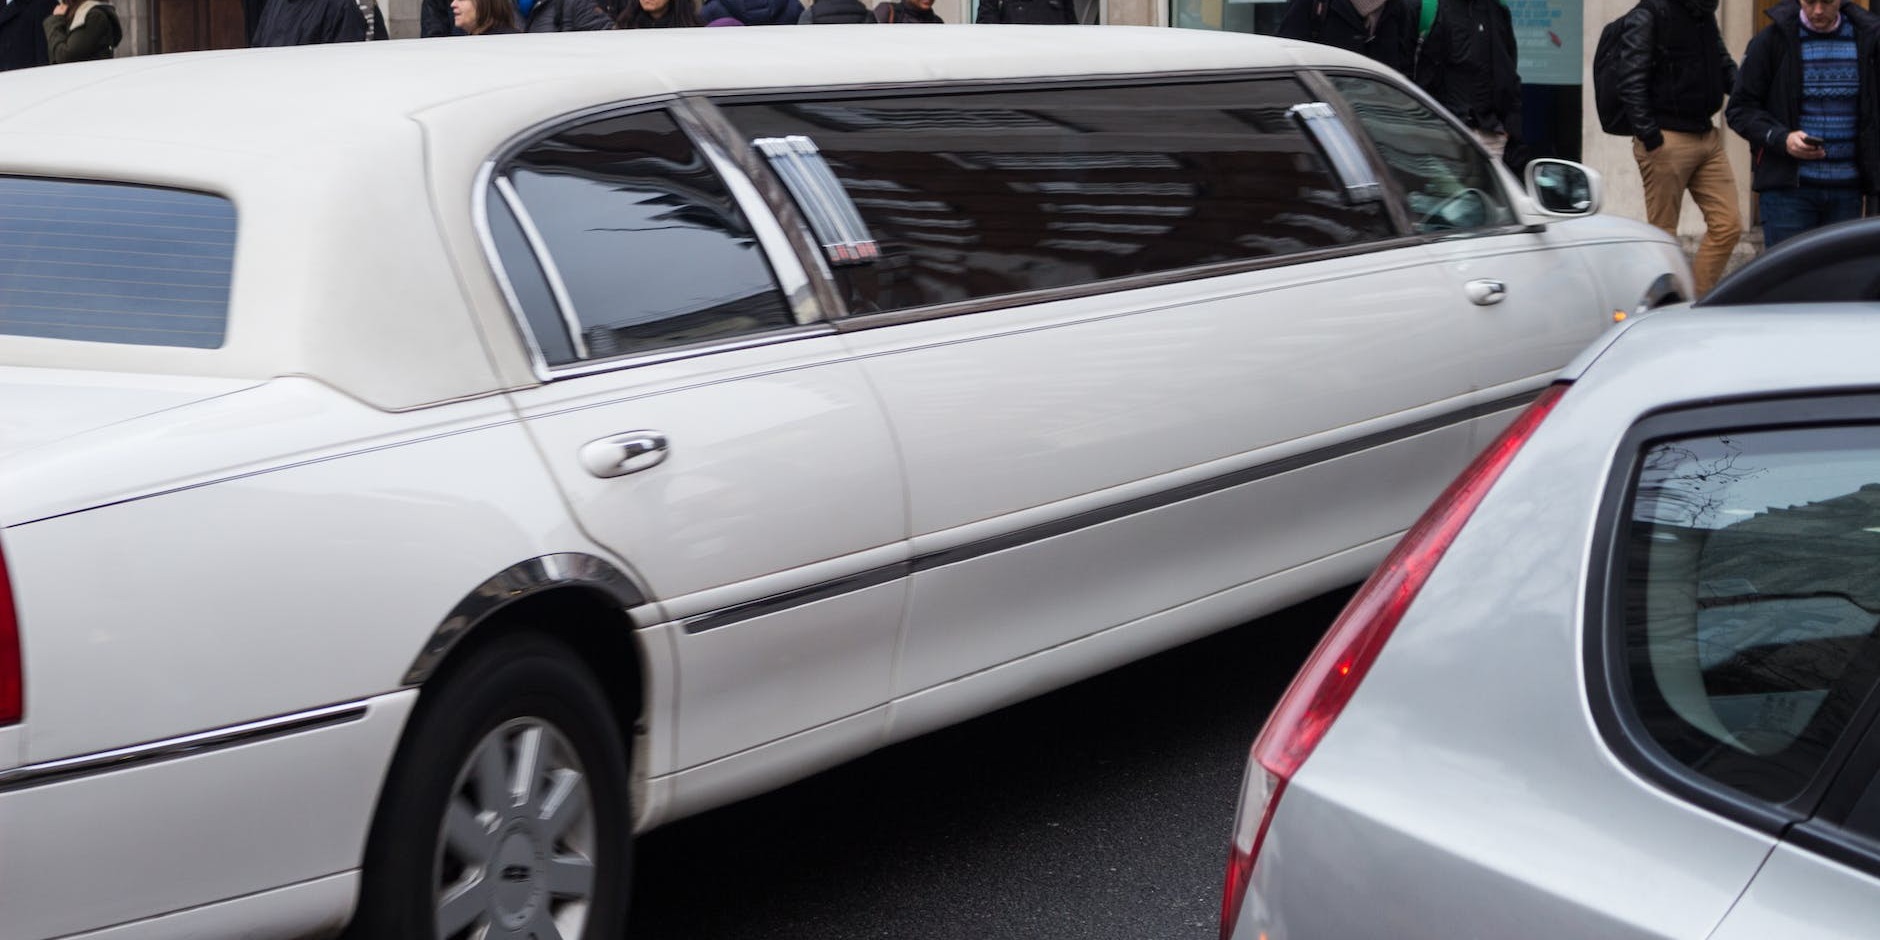 Top Tips for Hiring a Limo for Prom in Greater London